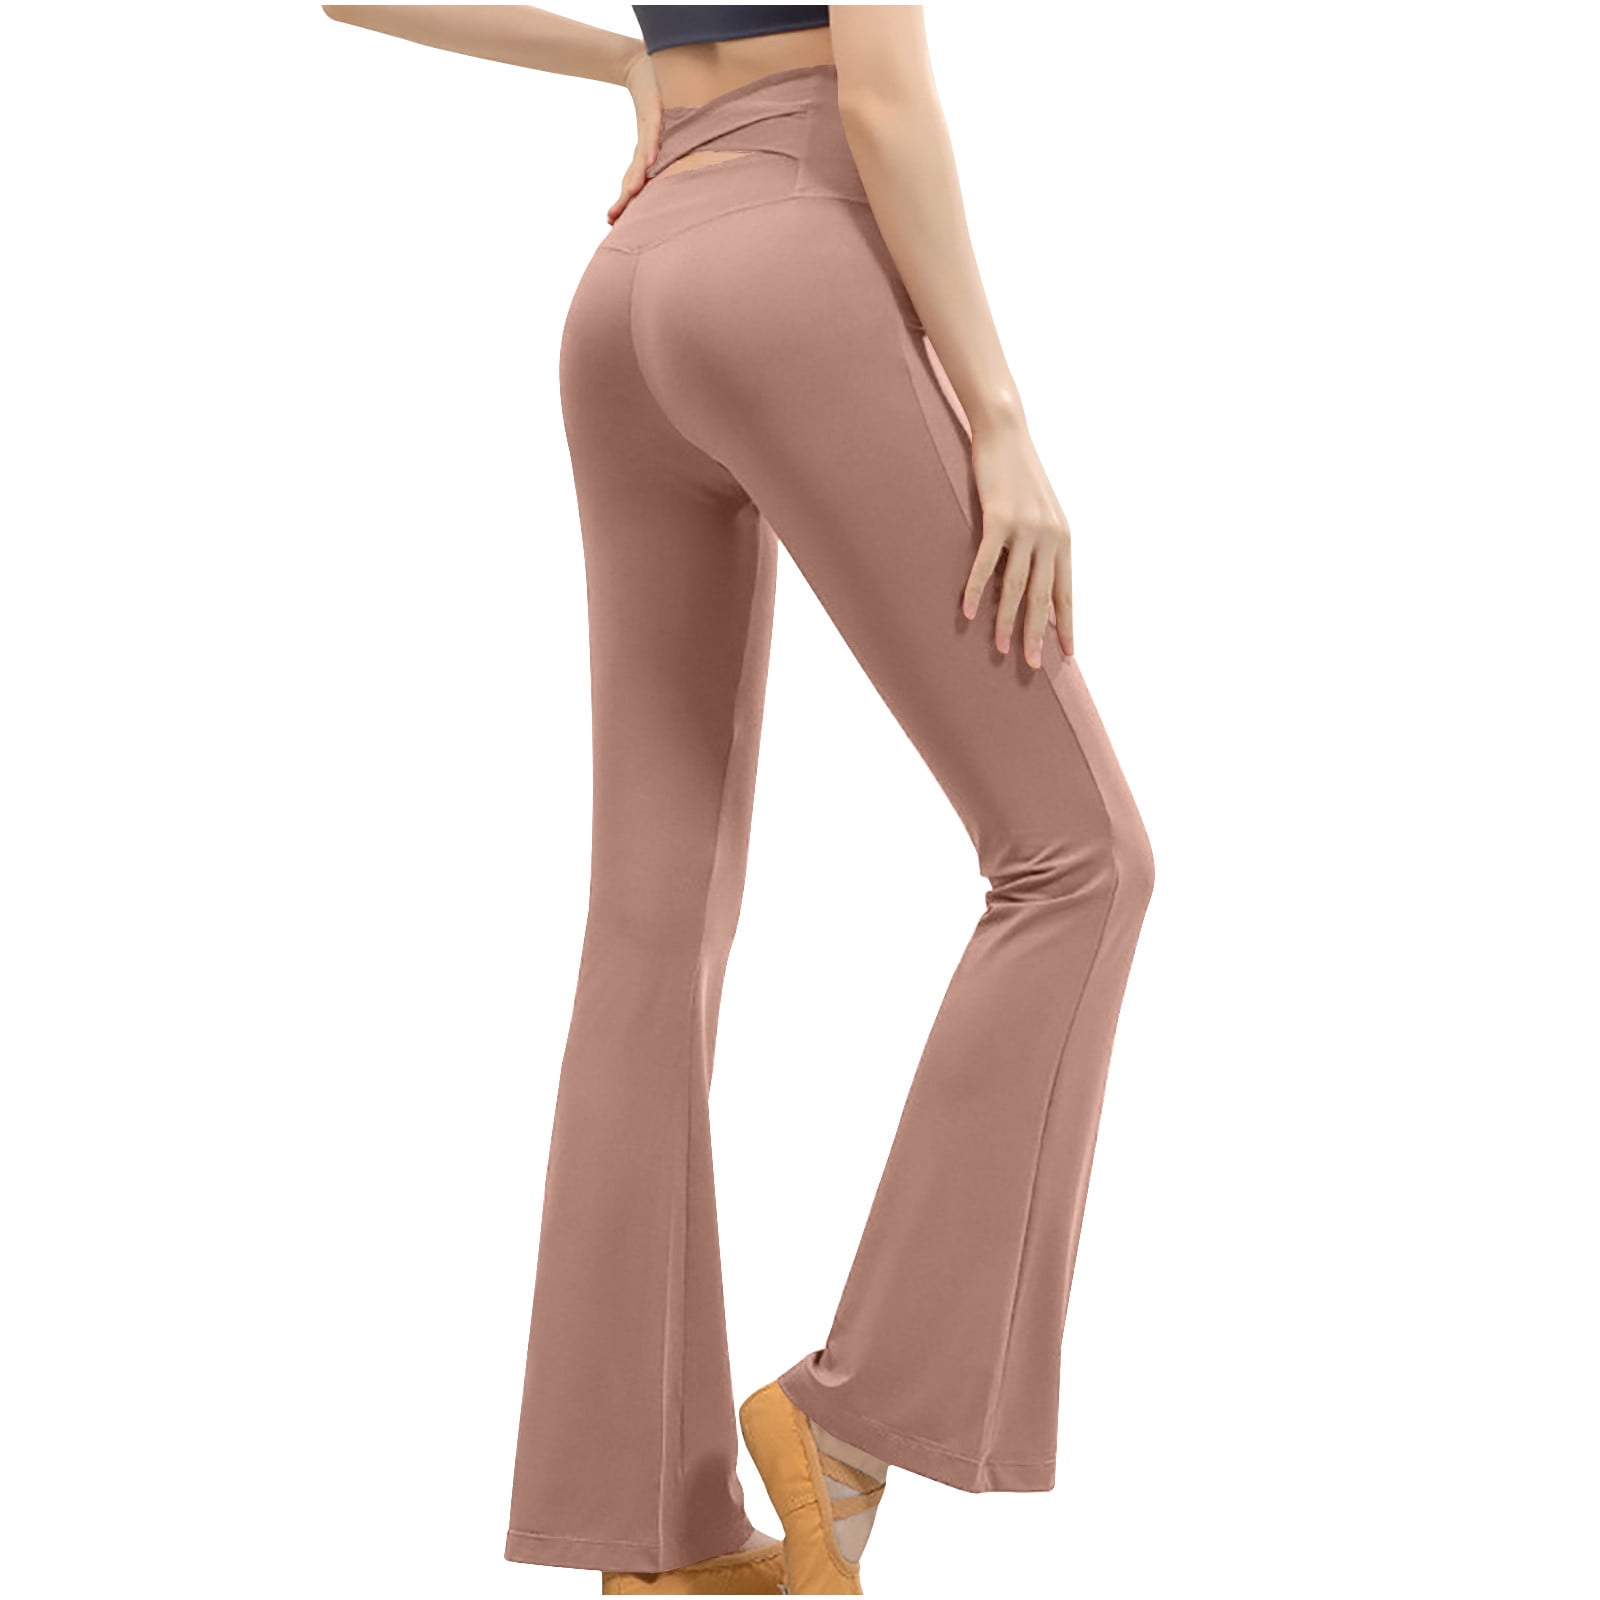 Zodggu Women's Solid Color Micro Flare High Waist And Hip Lifting Exercise  Fitness Yoga Pants Comfy Dressy Young Girls Love Linen Pants Cargo Pants  Khaki S 